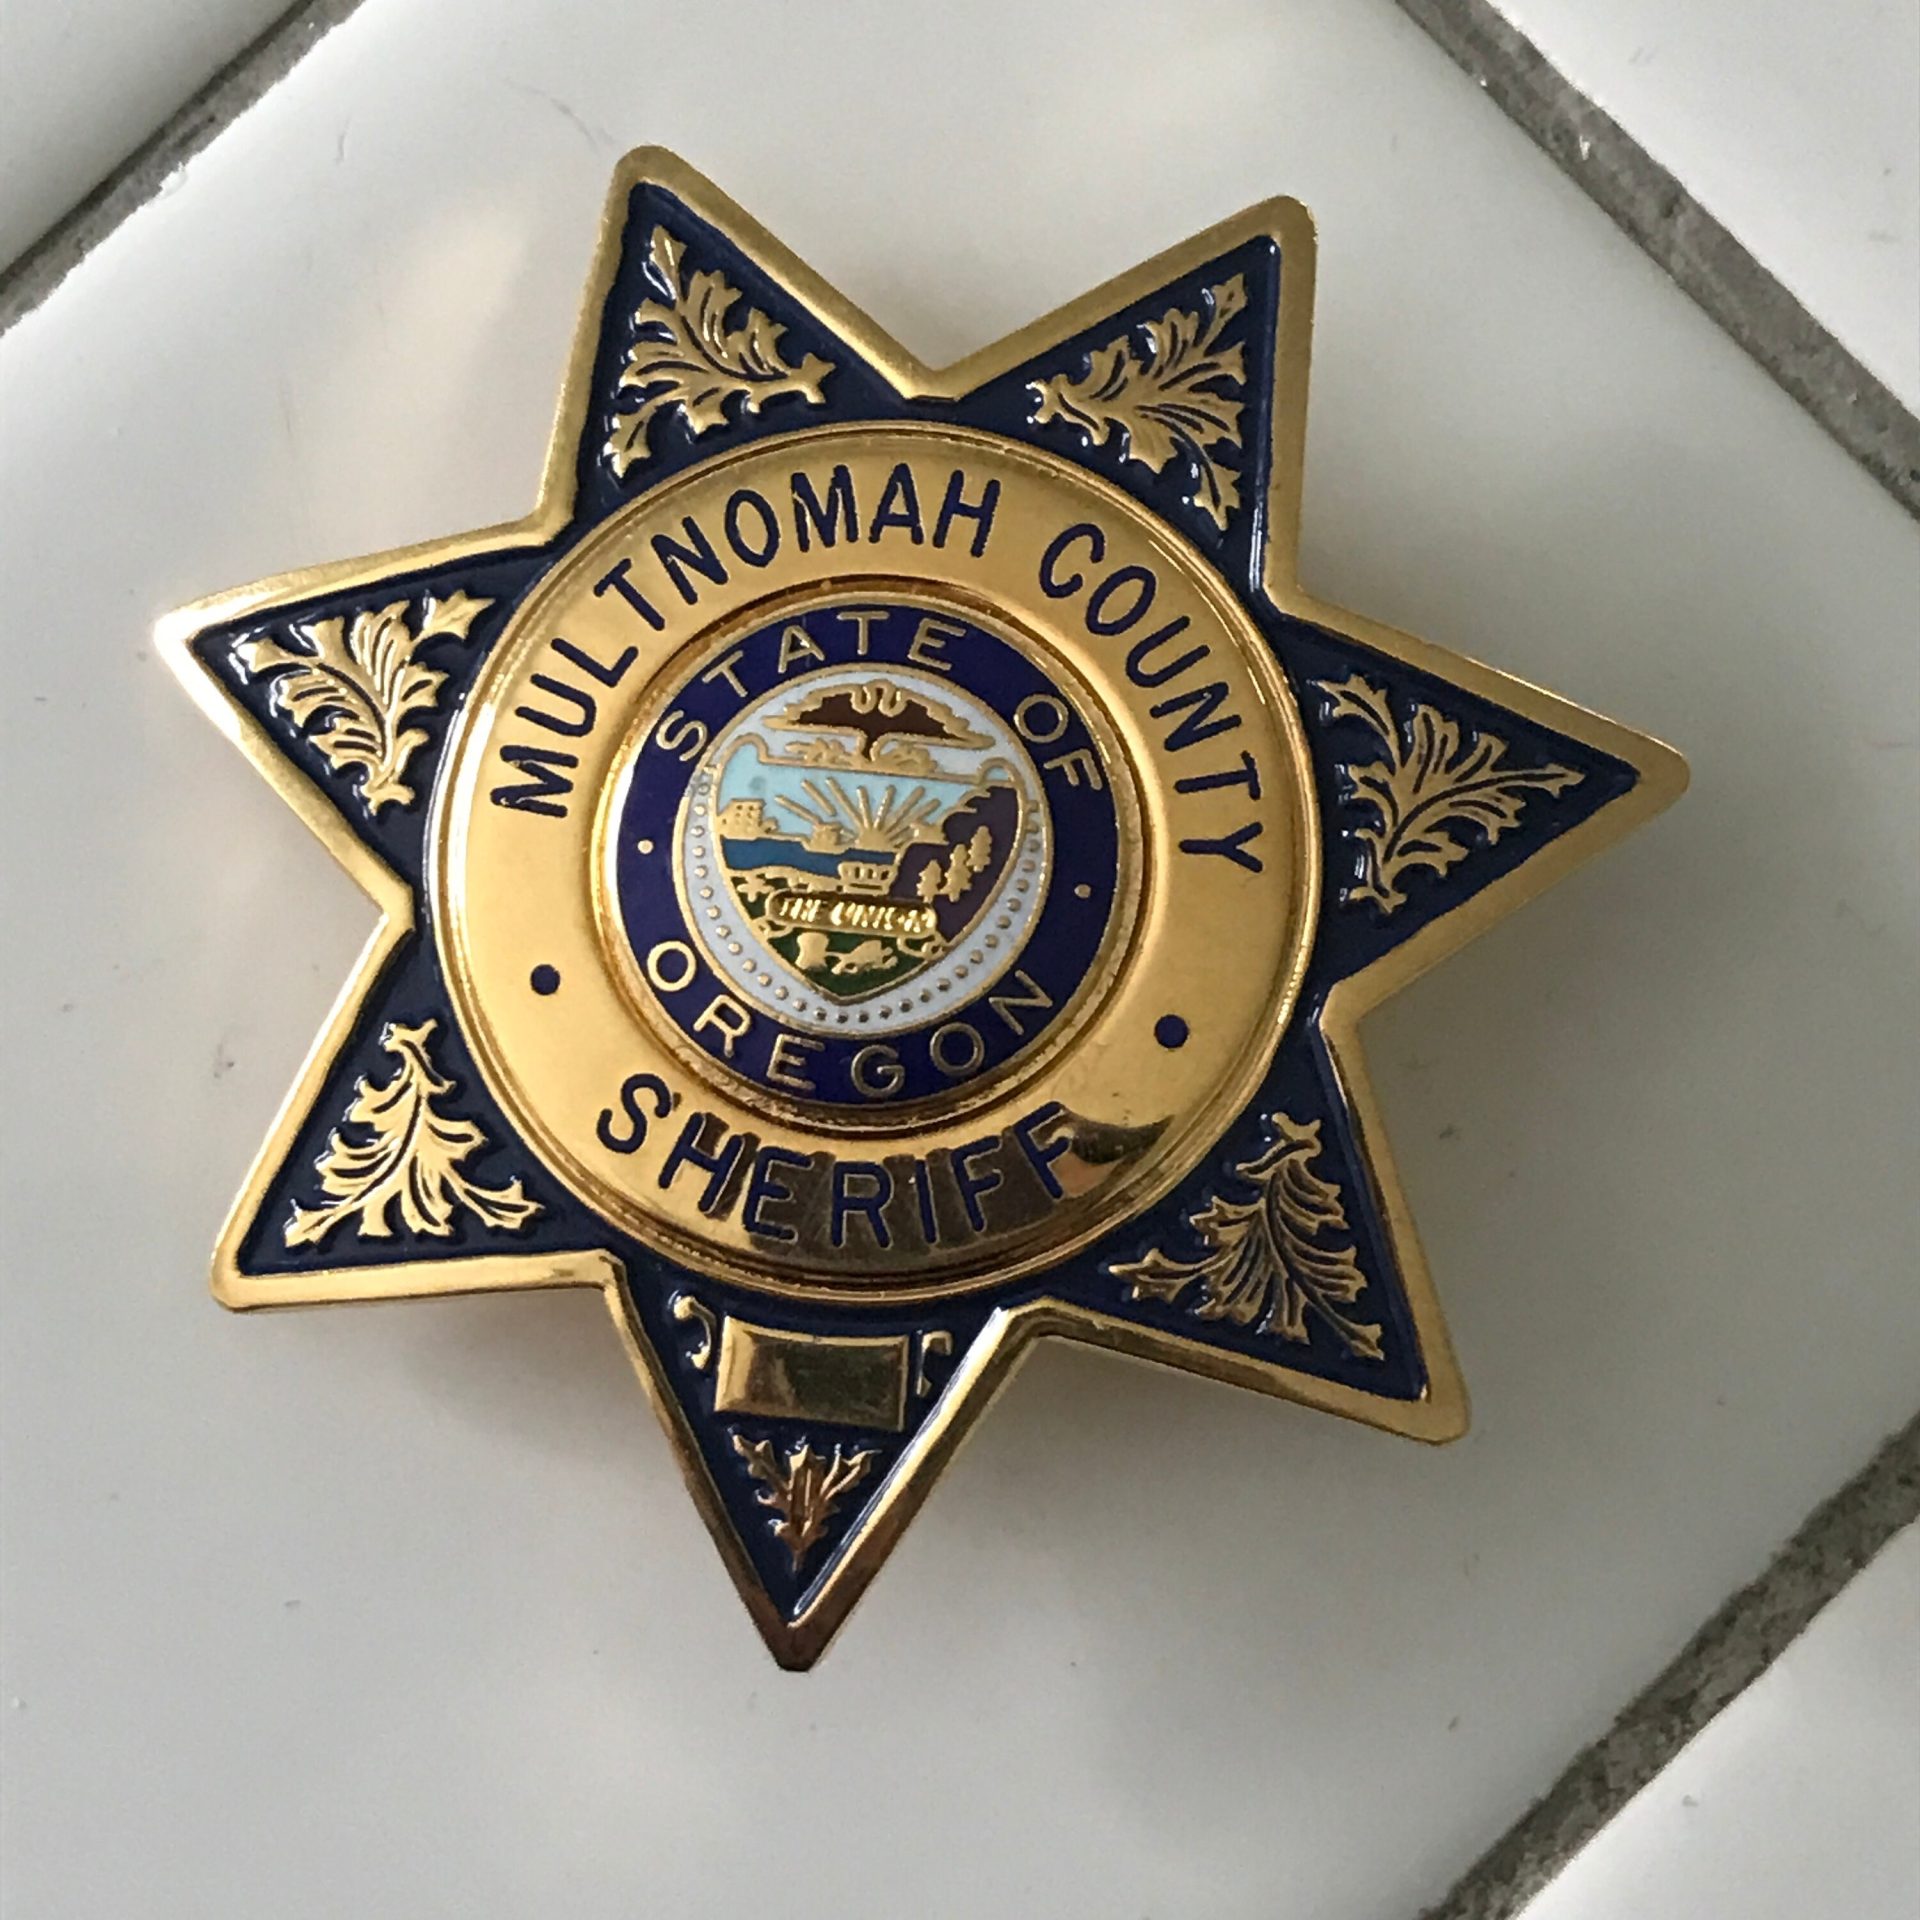 Richland County Sheriff issues anniversary badges marking 150 years of  service, The Mighty 790 KFGO